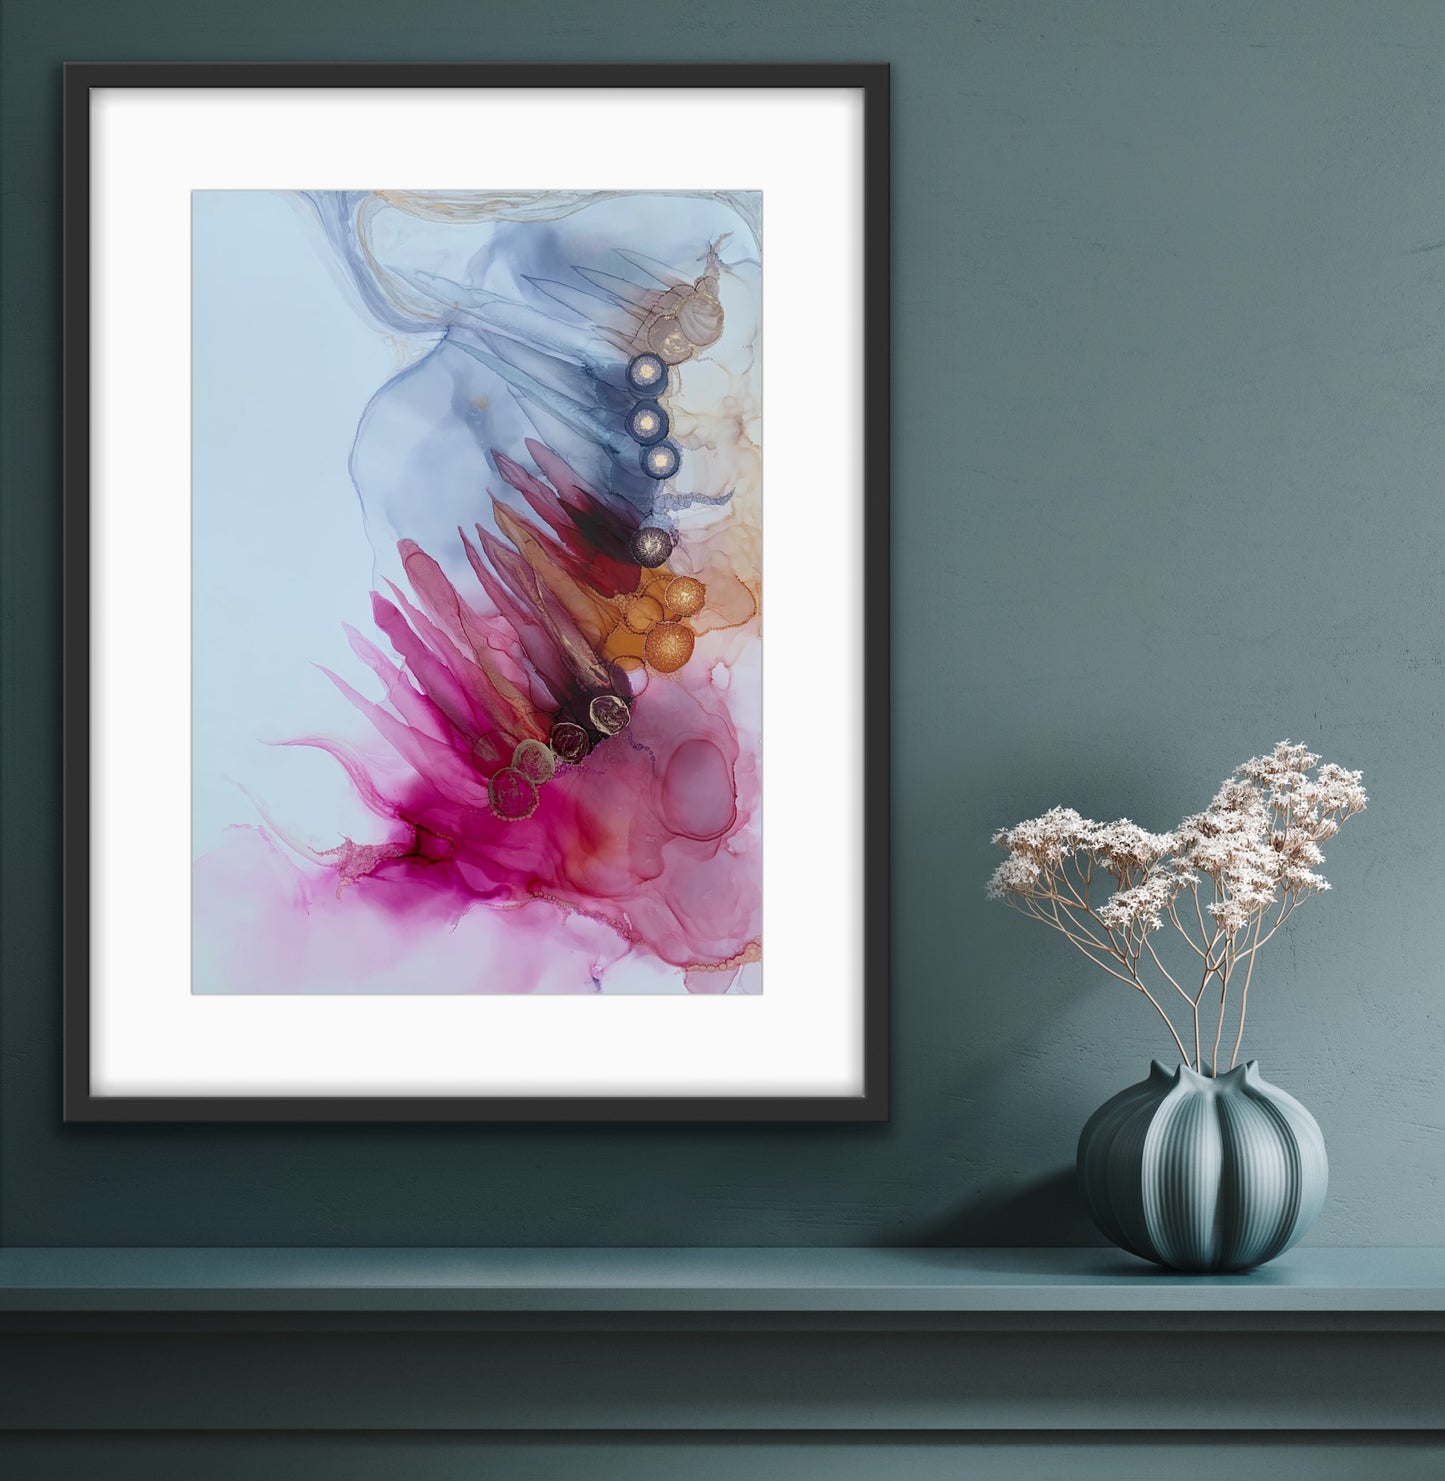 In Dreams - Original abstract artwork in pink, purple and gold.